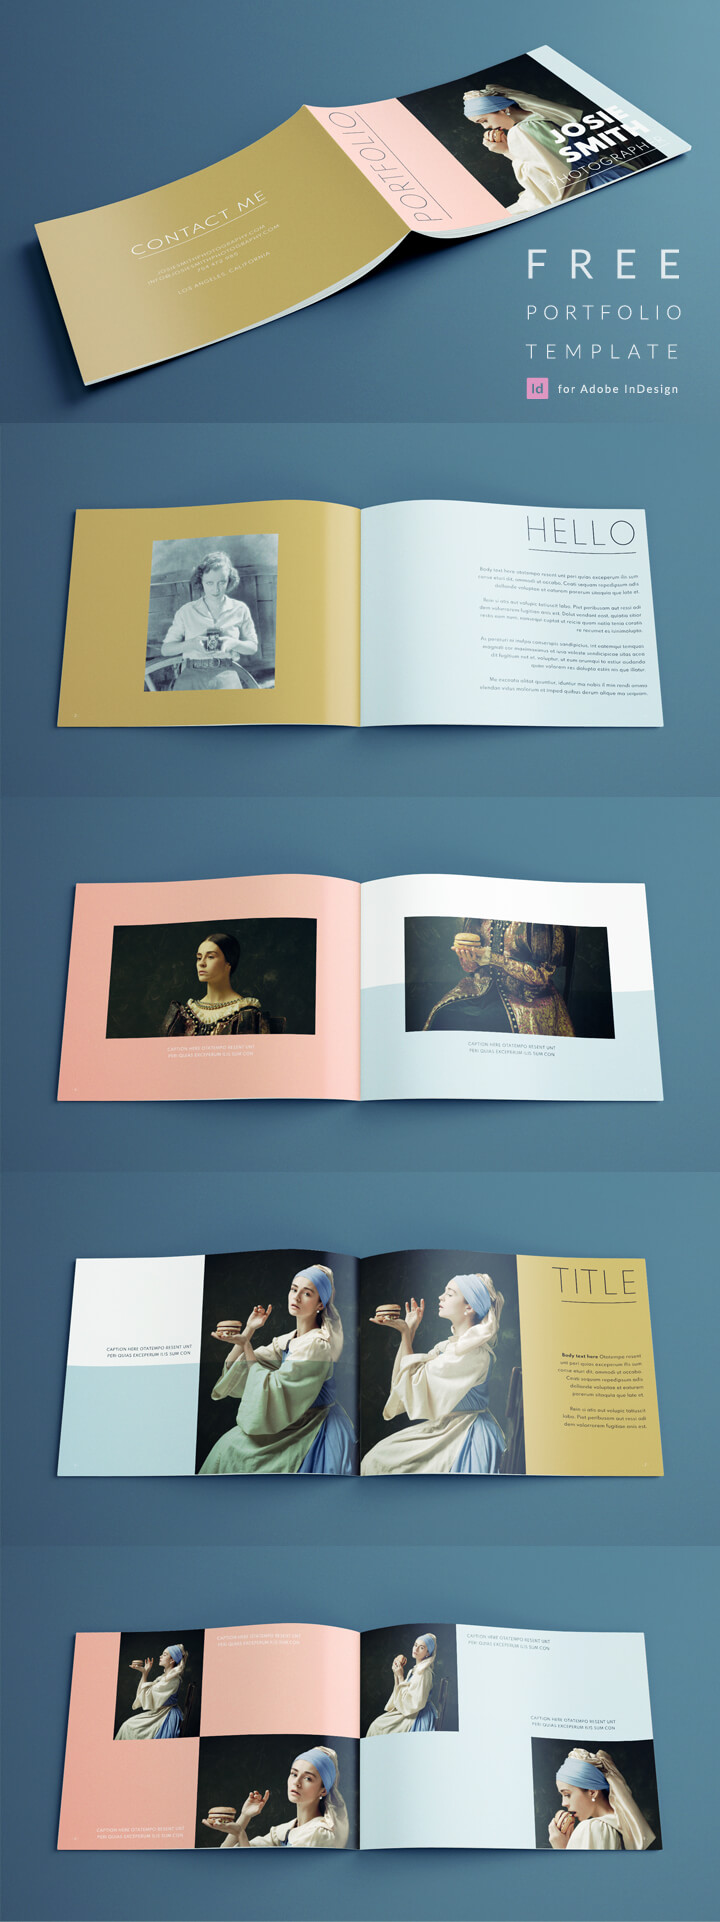 Photography portfolio layout template for InDesign - simple creative design - free download.